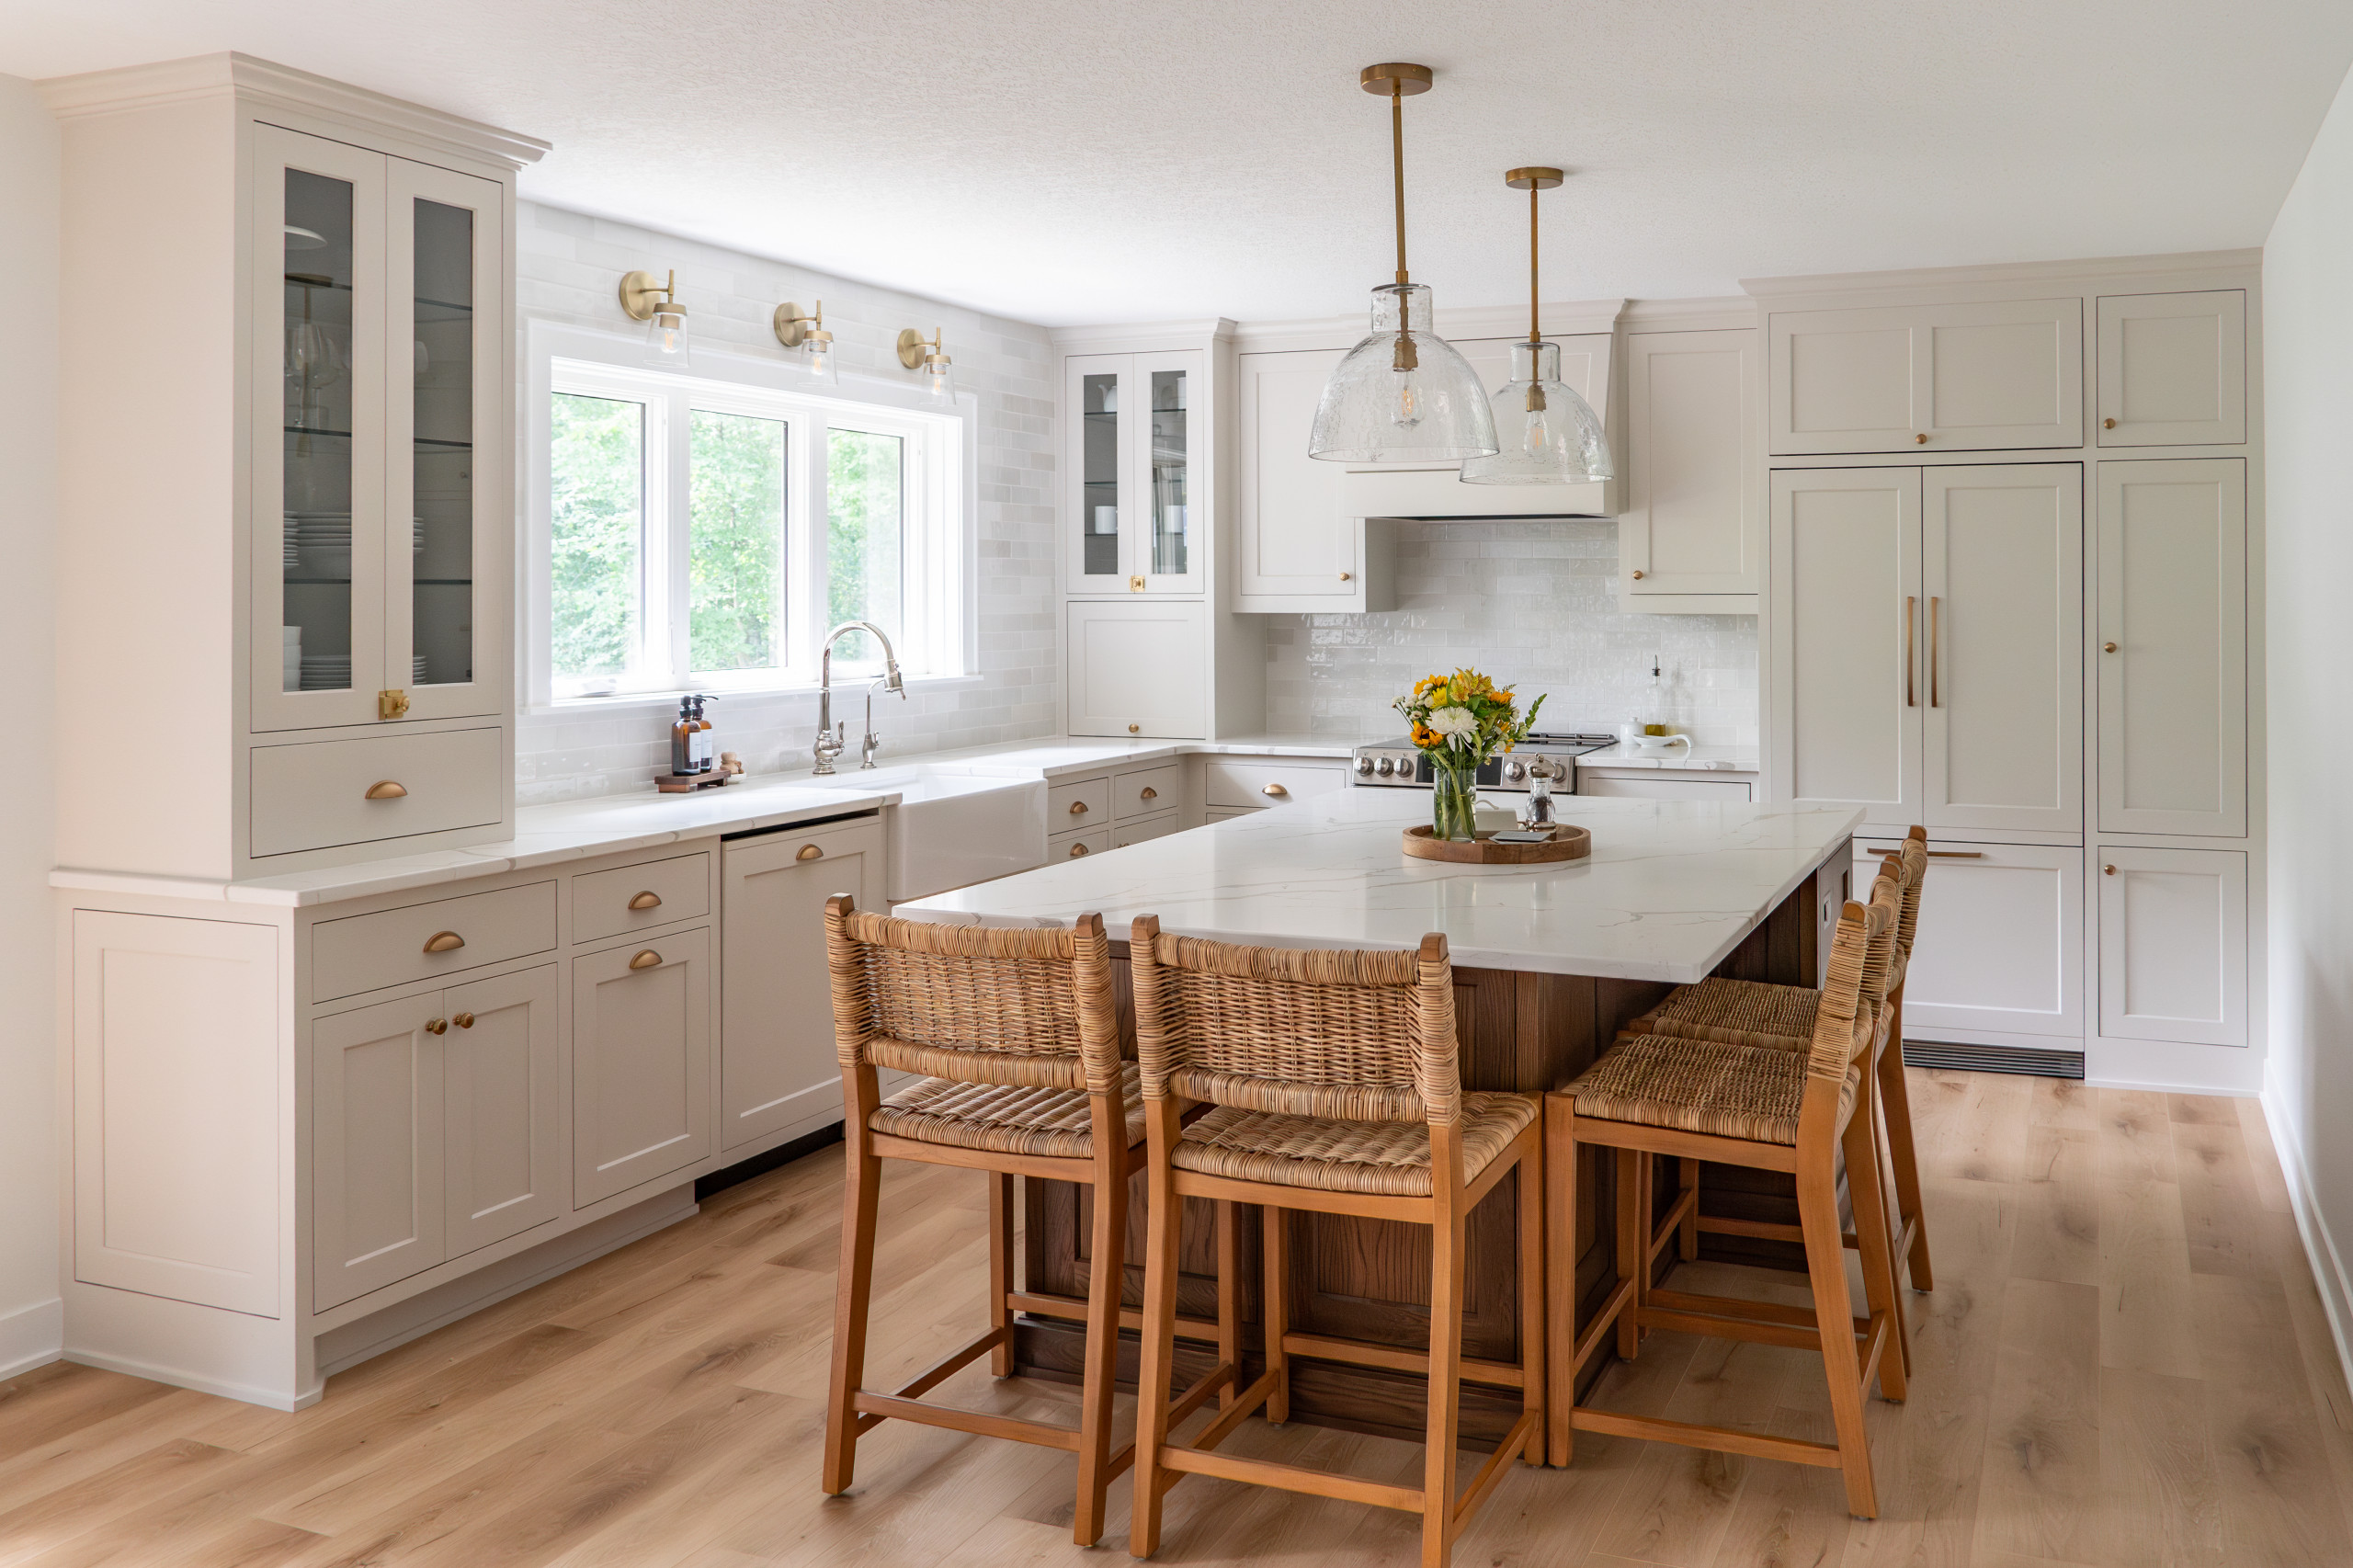 a kitchen with white cabinets and countertops and warm wooden furniture accents